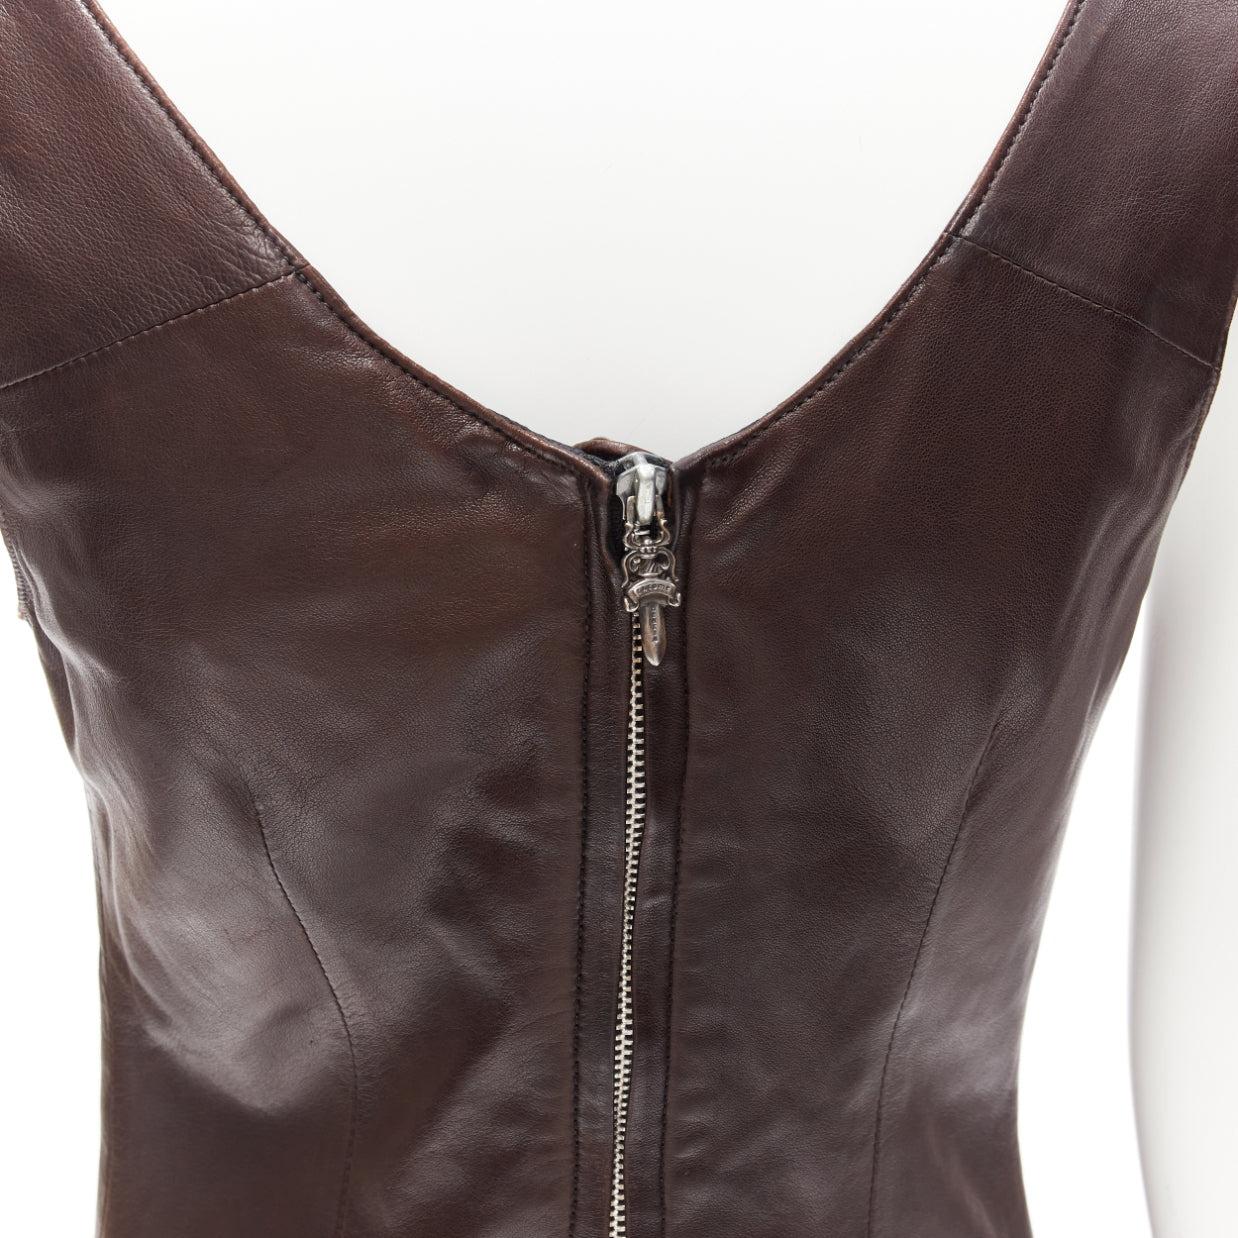 Rare CHROME HEARTS brown leather black Cross Dagger zip dress M
Reference: TGAS/D00795
Brand: Chrome Hearts
Material: Leather
Color: Brown
Closure: Zip
Lining: Black Fabric
Extra Details: Back zip with Signature Dagger zipper head. Black Chrome